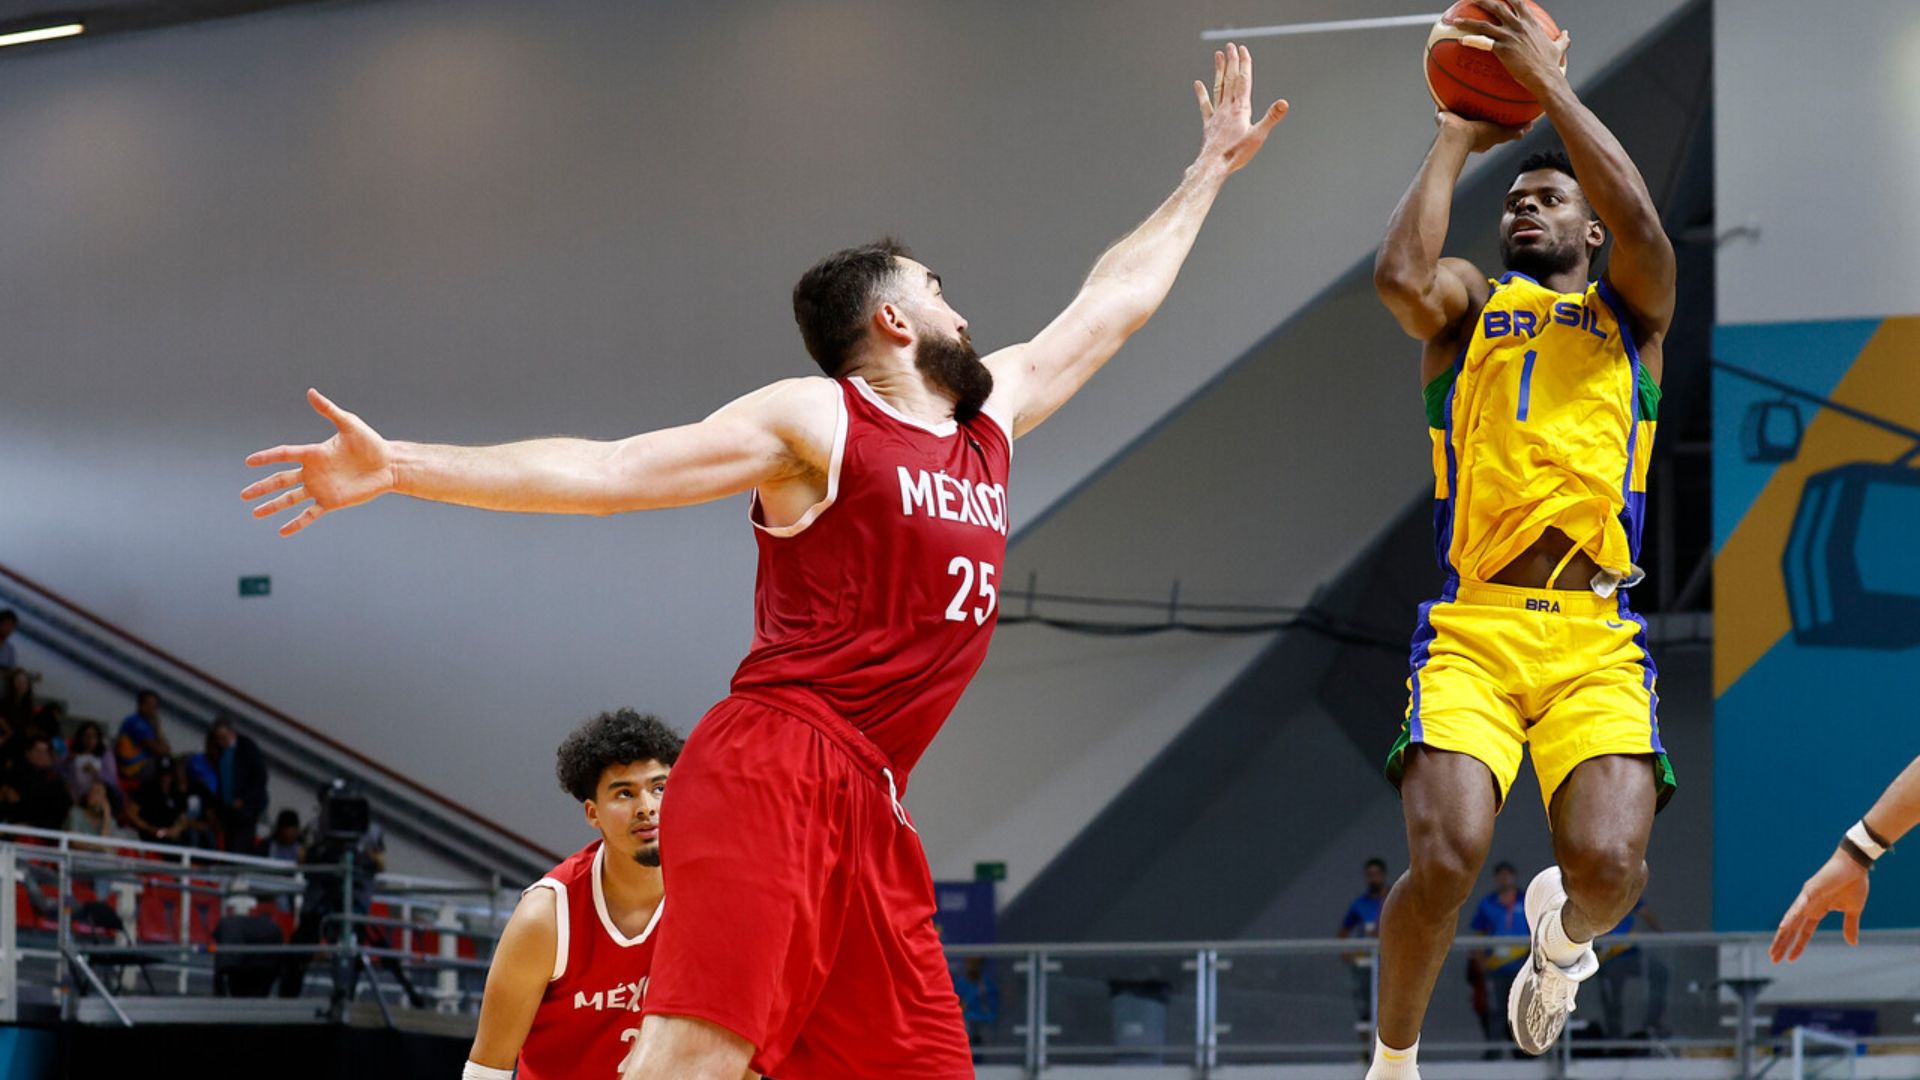 Brazil defeats Mexico and secures bronze in male's basketball